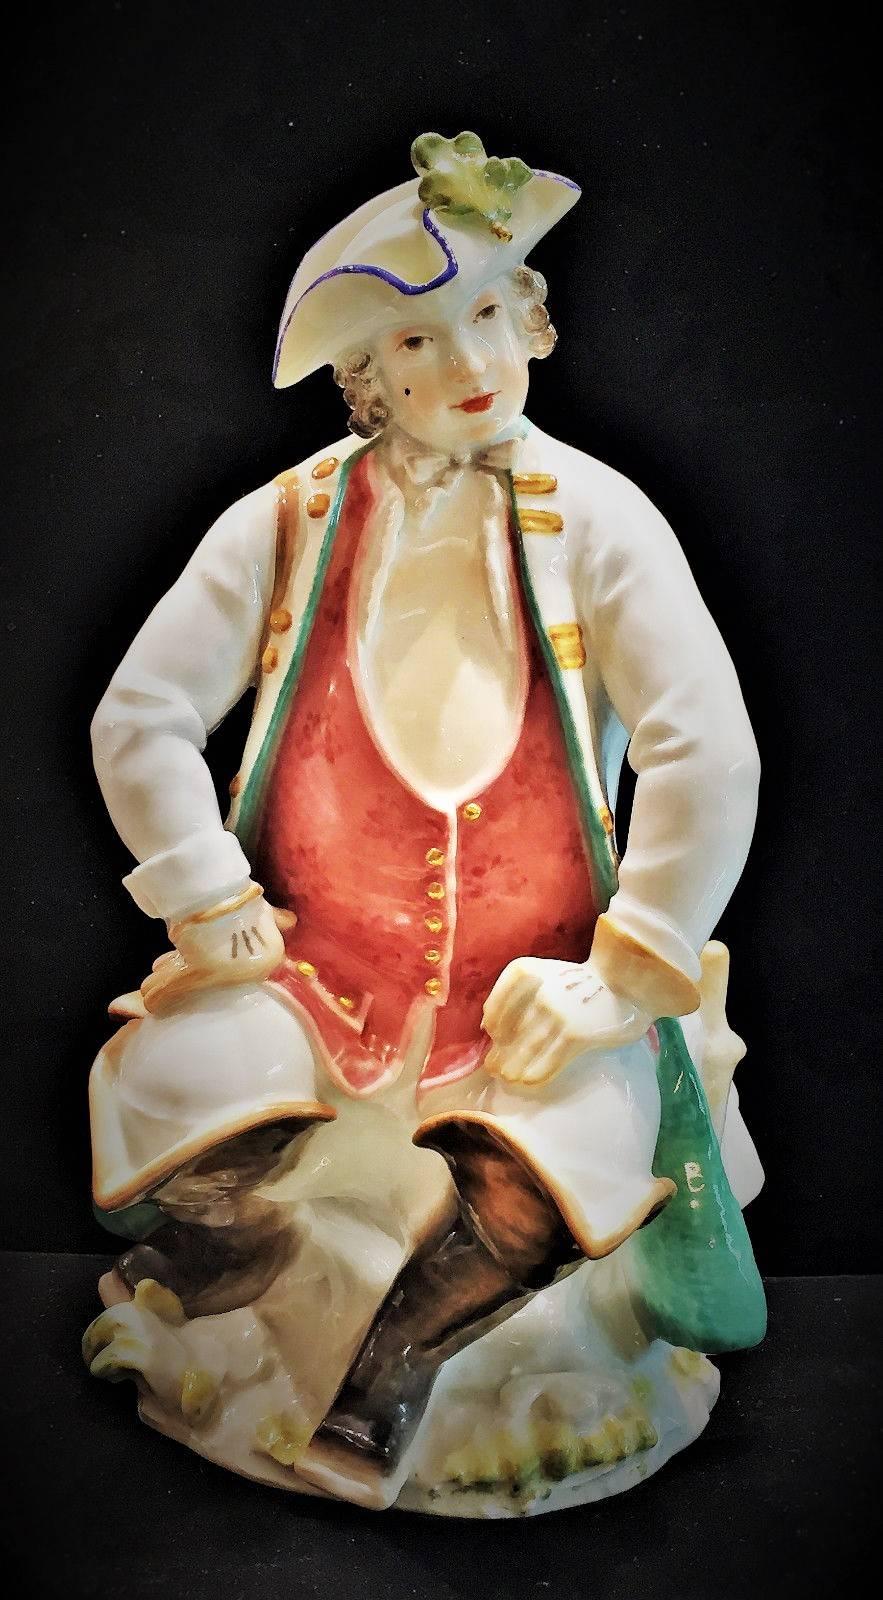 Presented here is one of the finest Meissen porcelain figurines of the Art Deco period by Professor Paul Scheurich (1883-1945), who is acknowledged to be one of the 20th century's greatest modelers. The back of the base has a blue under-glaze